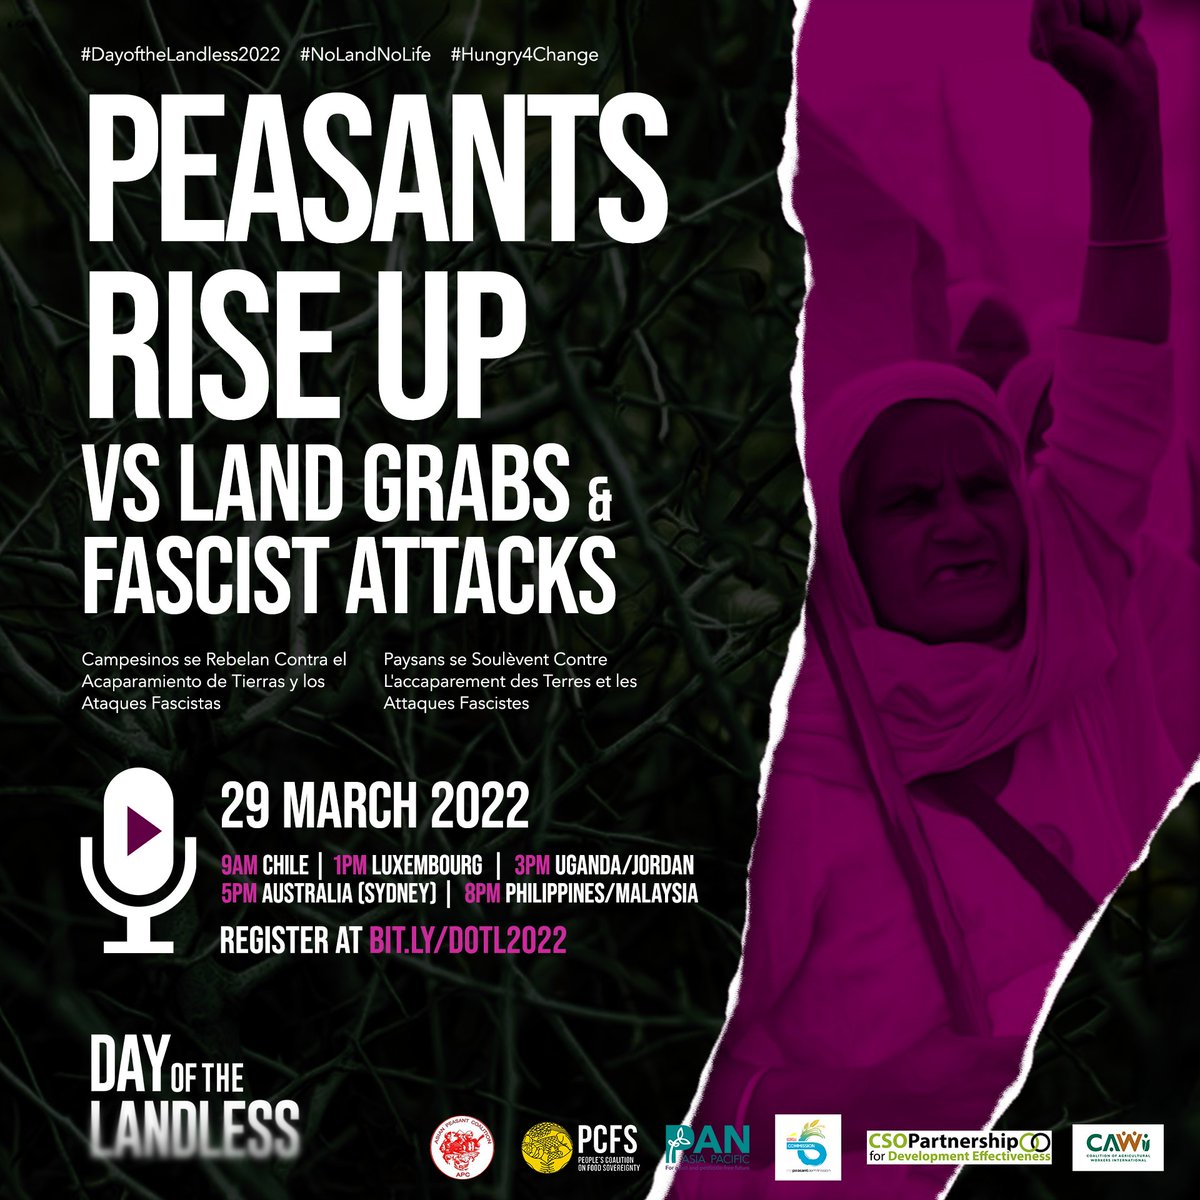 SEE YOU TOMORROW!

Fascism kills farmers. They feed the world, but they cannot do so when they're under attack.

Hear their stories in Peasants Rise Up vs Land Grabs and Fascist Attacks. Register to join: bit.ly/DOTL2022

#NoLandNoLife
#Hungry4Change
#PeopleFightFascism